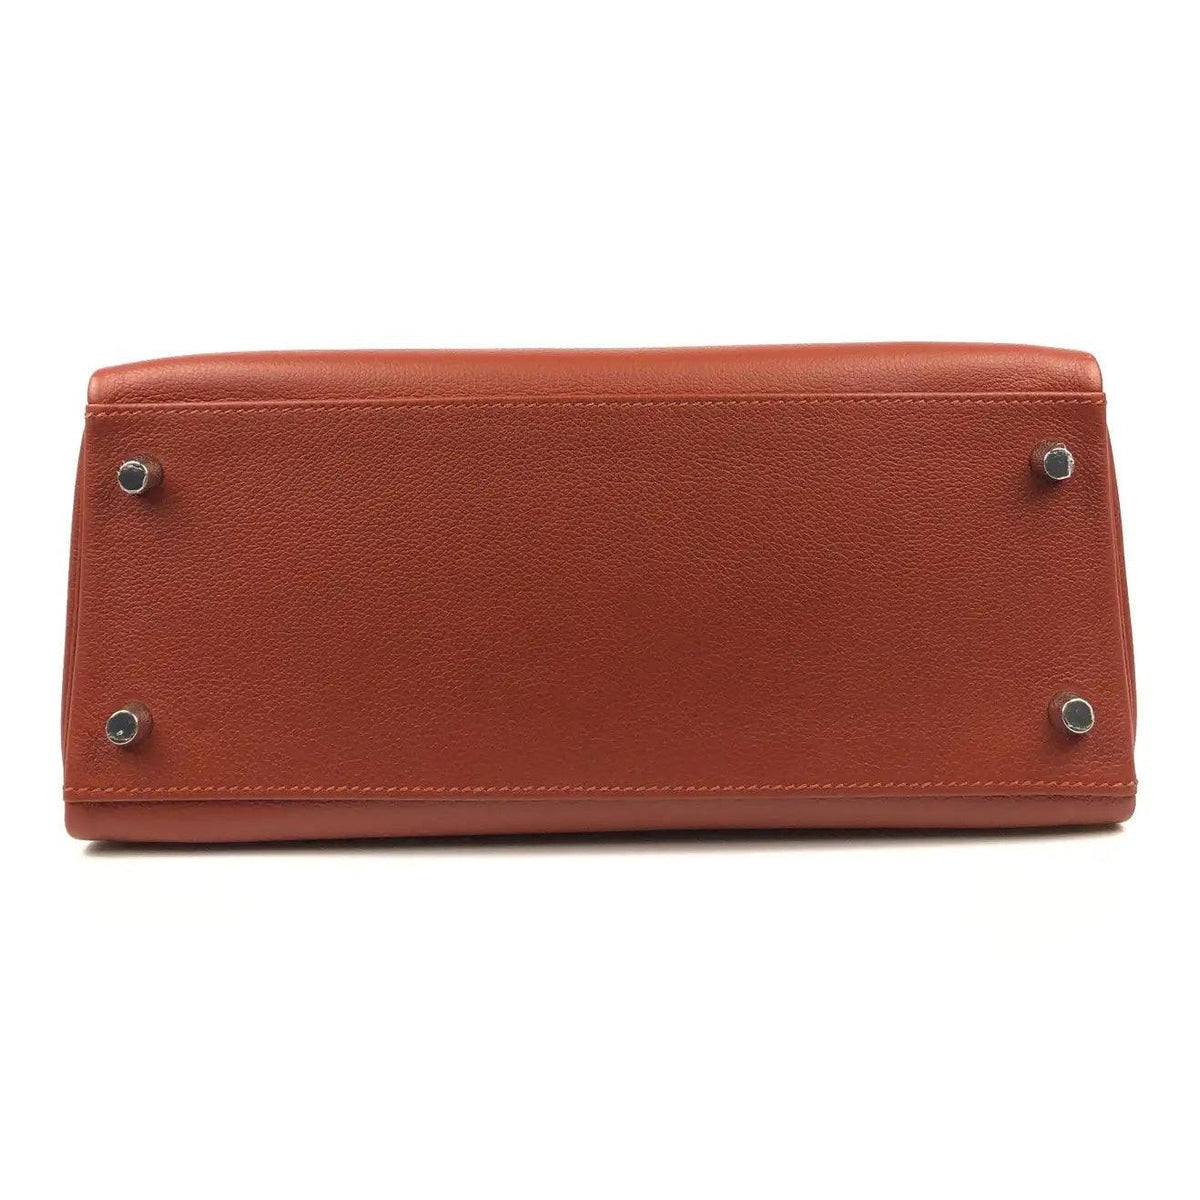 Hermes Kelly To Go Wallet - 11 For Sale on 1stDibs